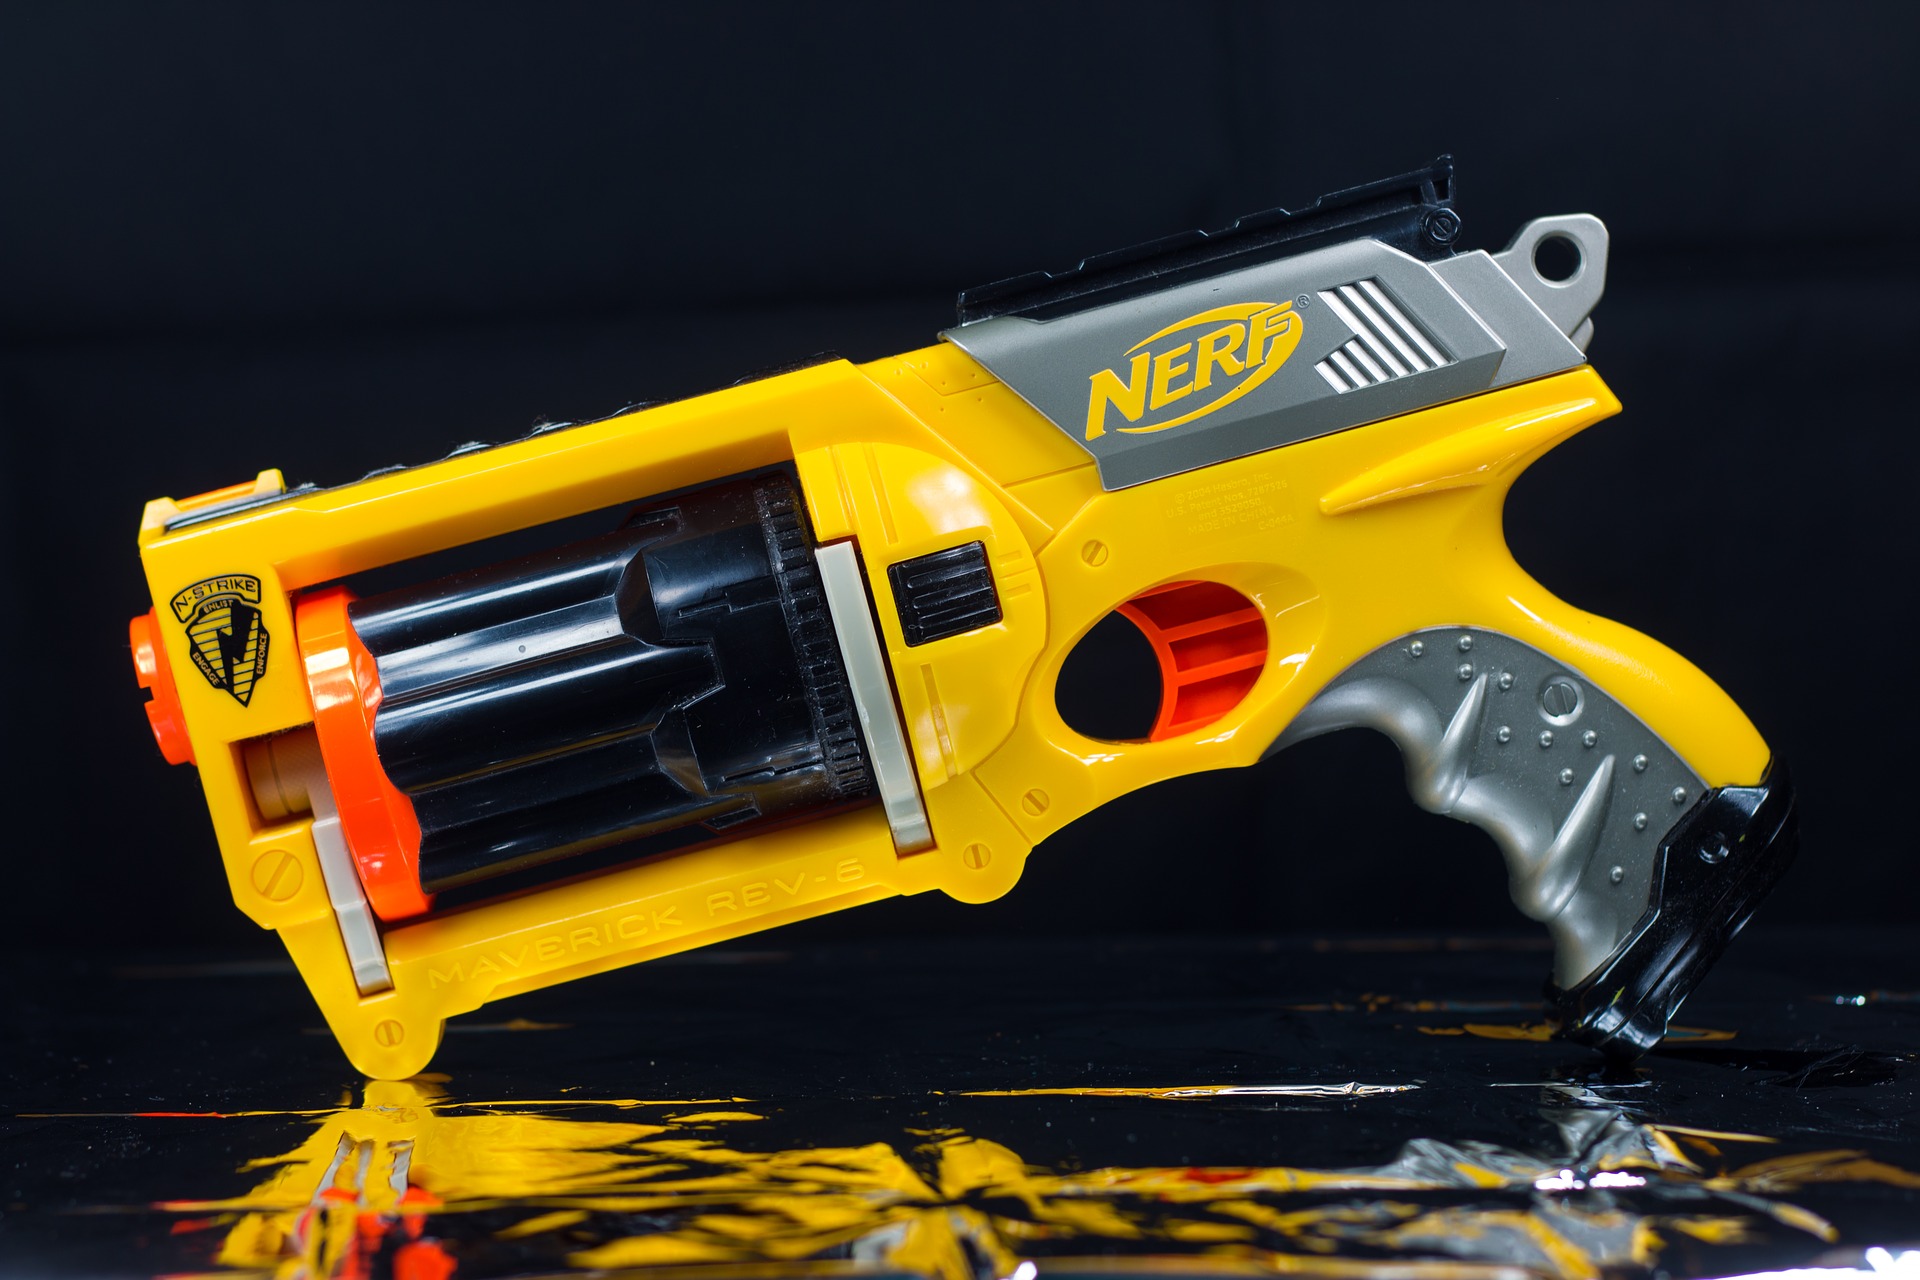 Image of a yellow NERF toy gun.